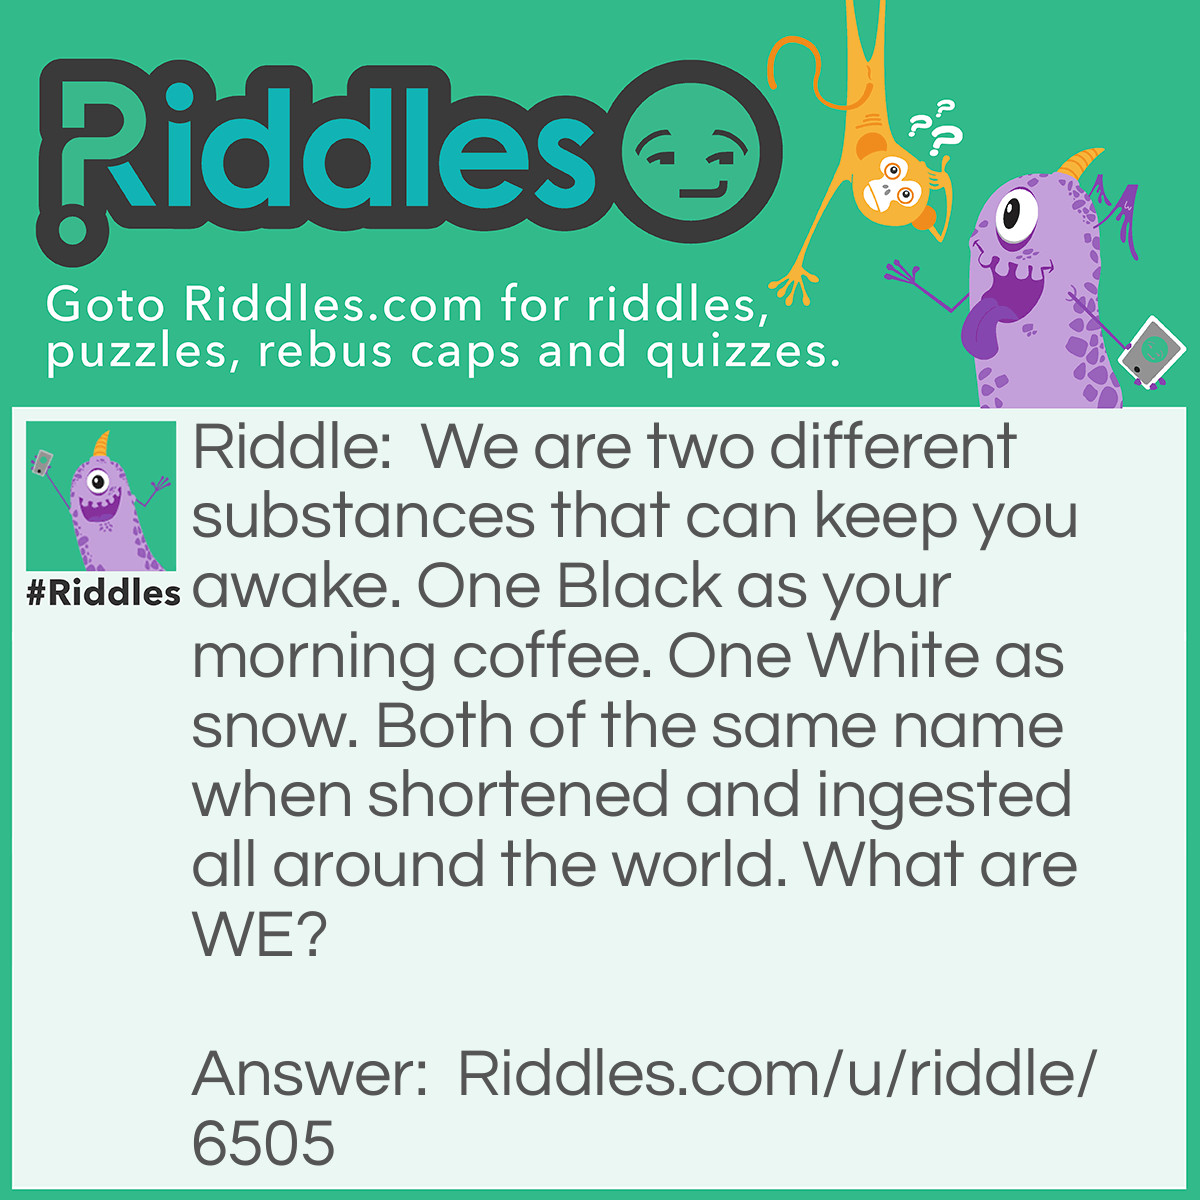 Riddle: We are two different substances that can keep you awake. One Black as your morning coffee. One White as snow. Both of the same name when shortened and ingested all around the world. What are WE? Answer: Coke.